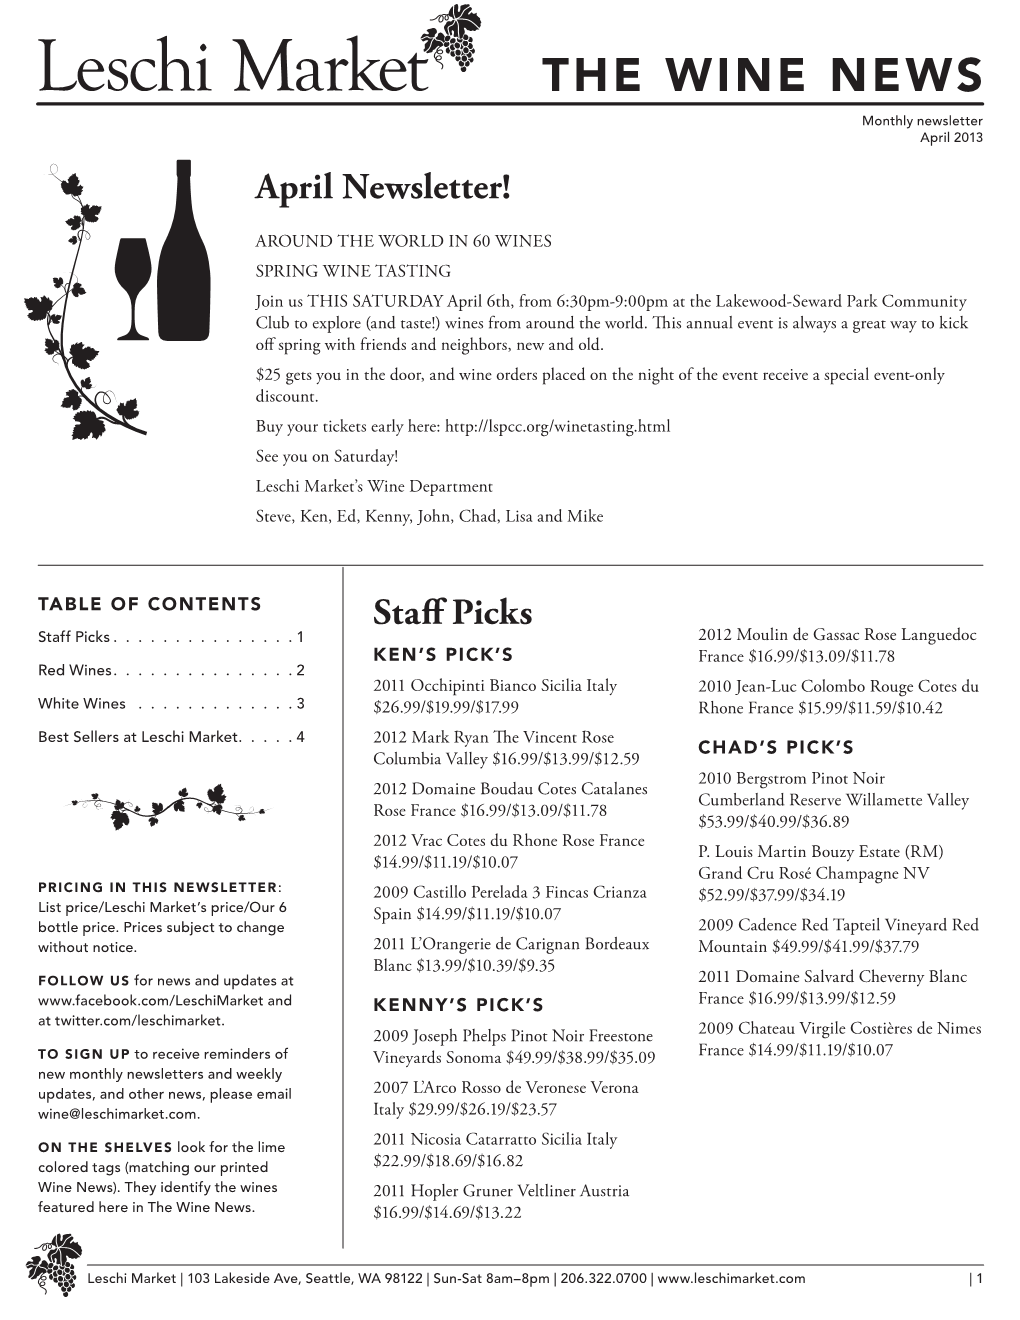 THE WINE NEWS Monthly Newsletter April 2013 April Newsletter!